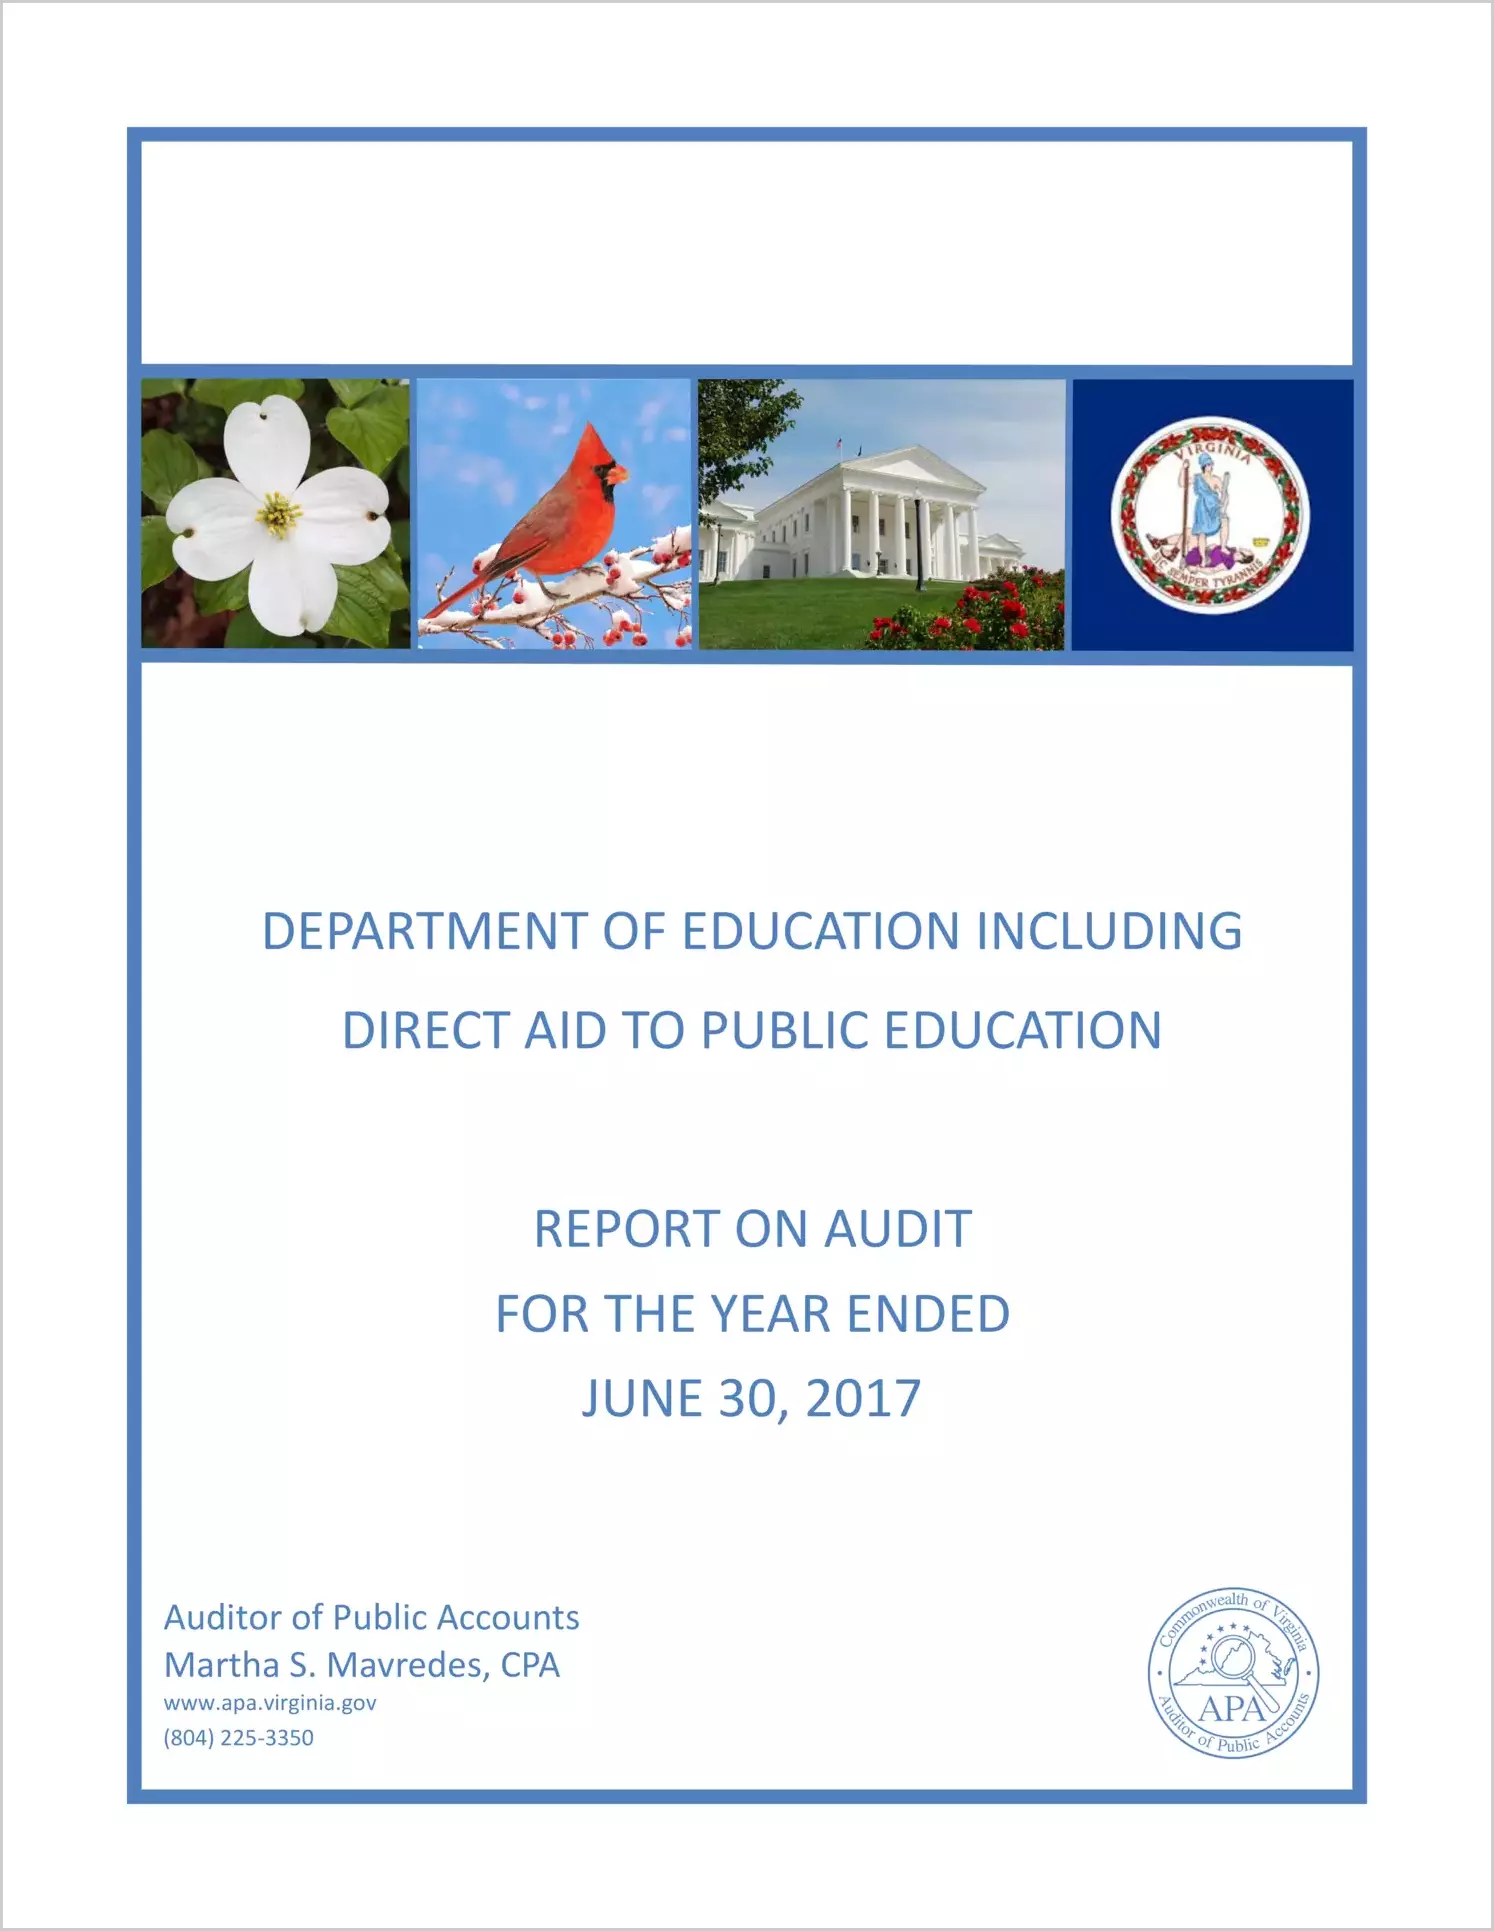 Department of Education including Direct Aid to Public Education for the year ended June 30, 2017